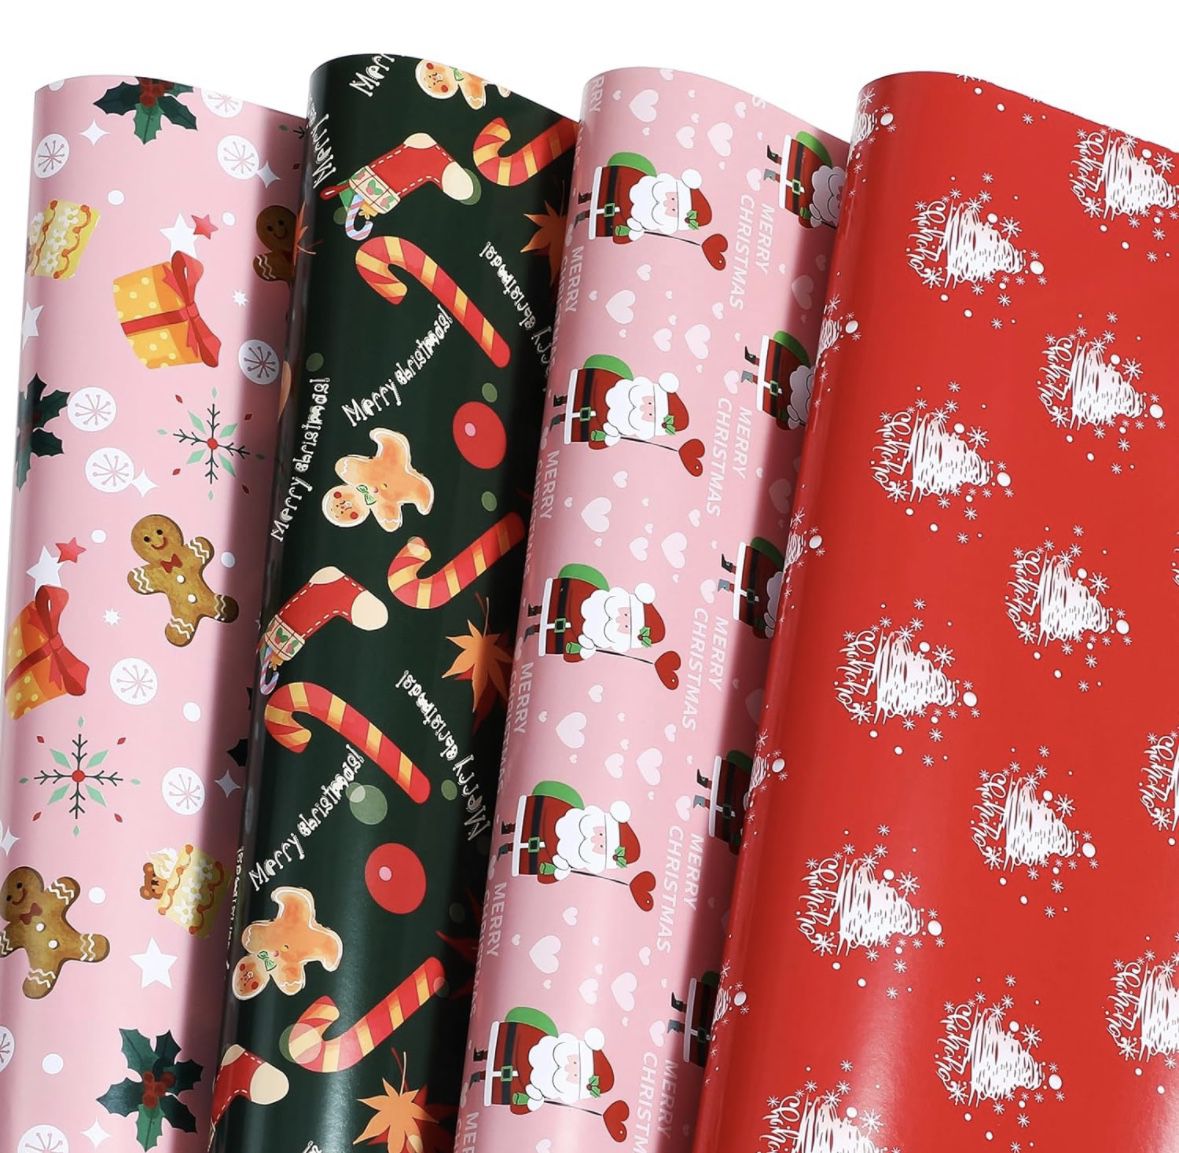 Christmas Wrapping Paper Pink Red Green With Cute Santa Claus, Christmas Tree Candy Cookies